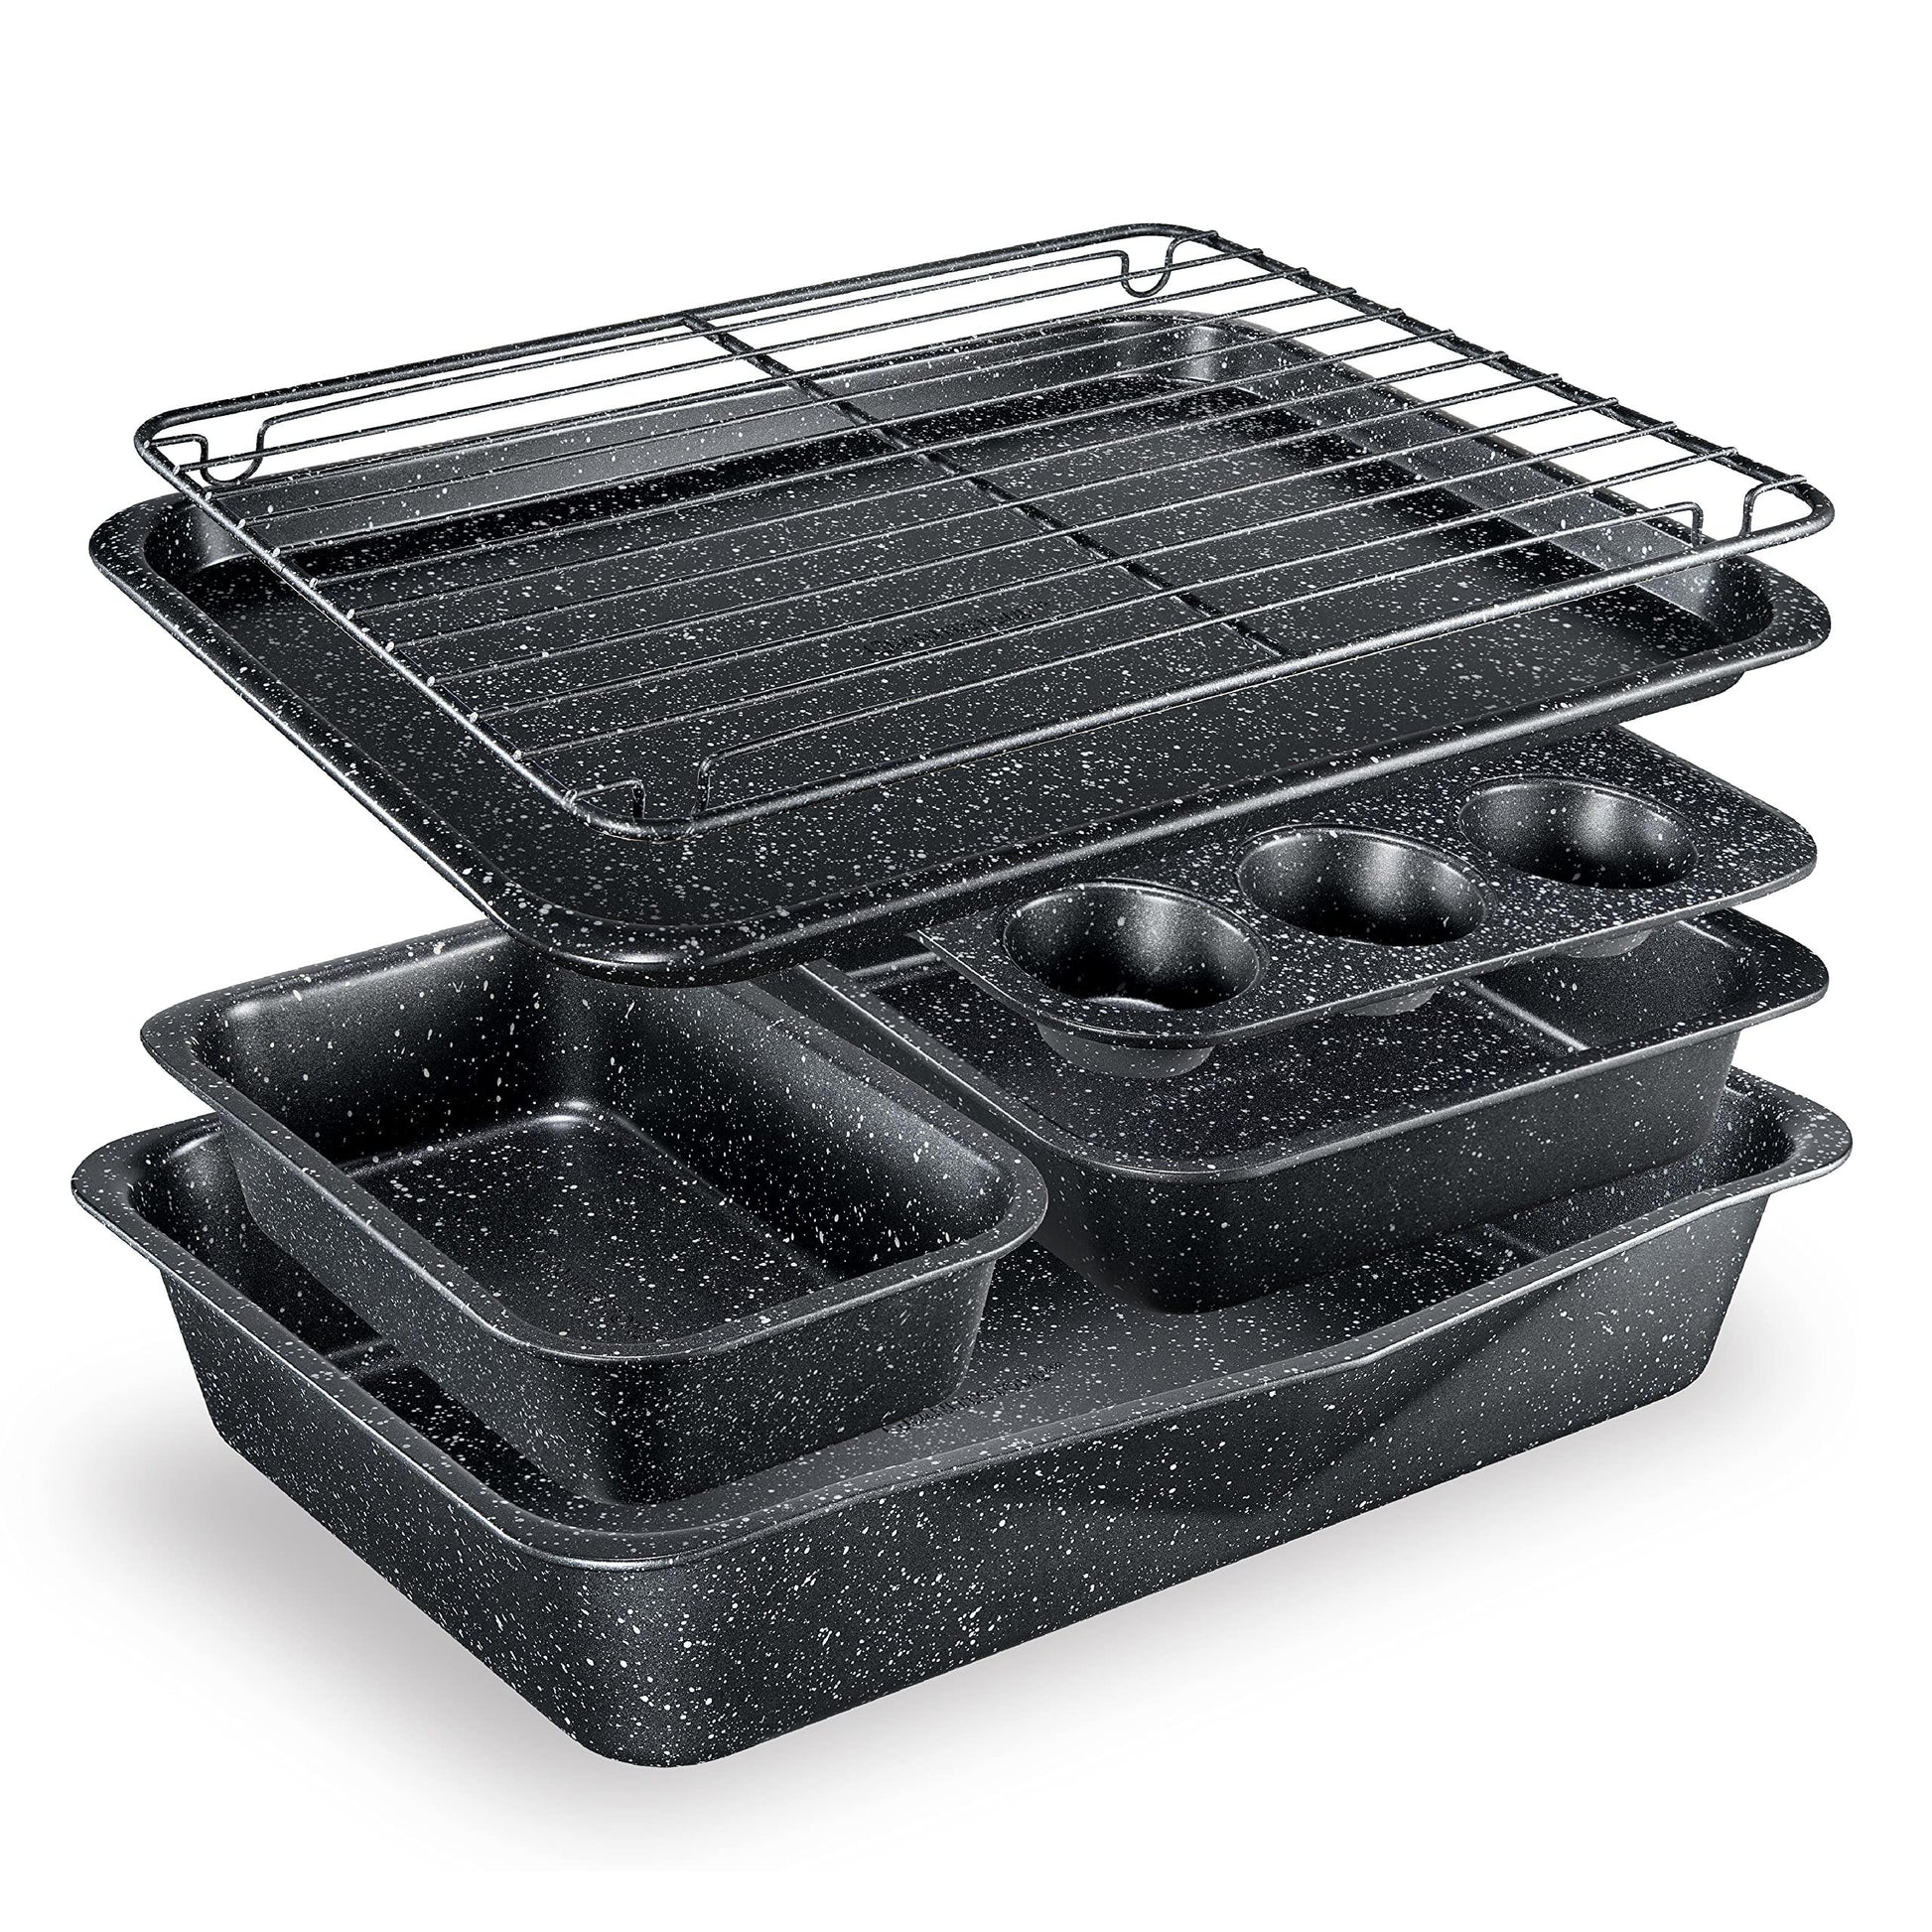 Granitestone Black 6 Pc Stackable Nonstick Bakeware Set With Oven Pans, Baking Sheet, Wire Rack - Complete Kitchen Baking Set, Oven/Dishwasher Safe, 100% Non Toxic - CookCave